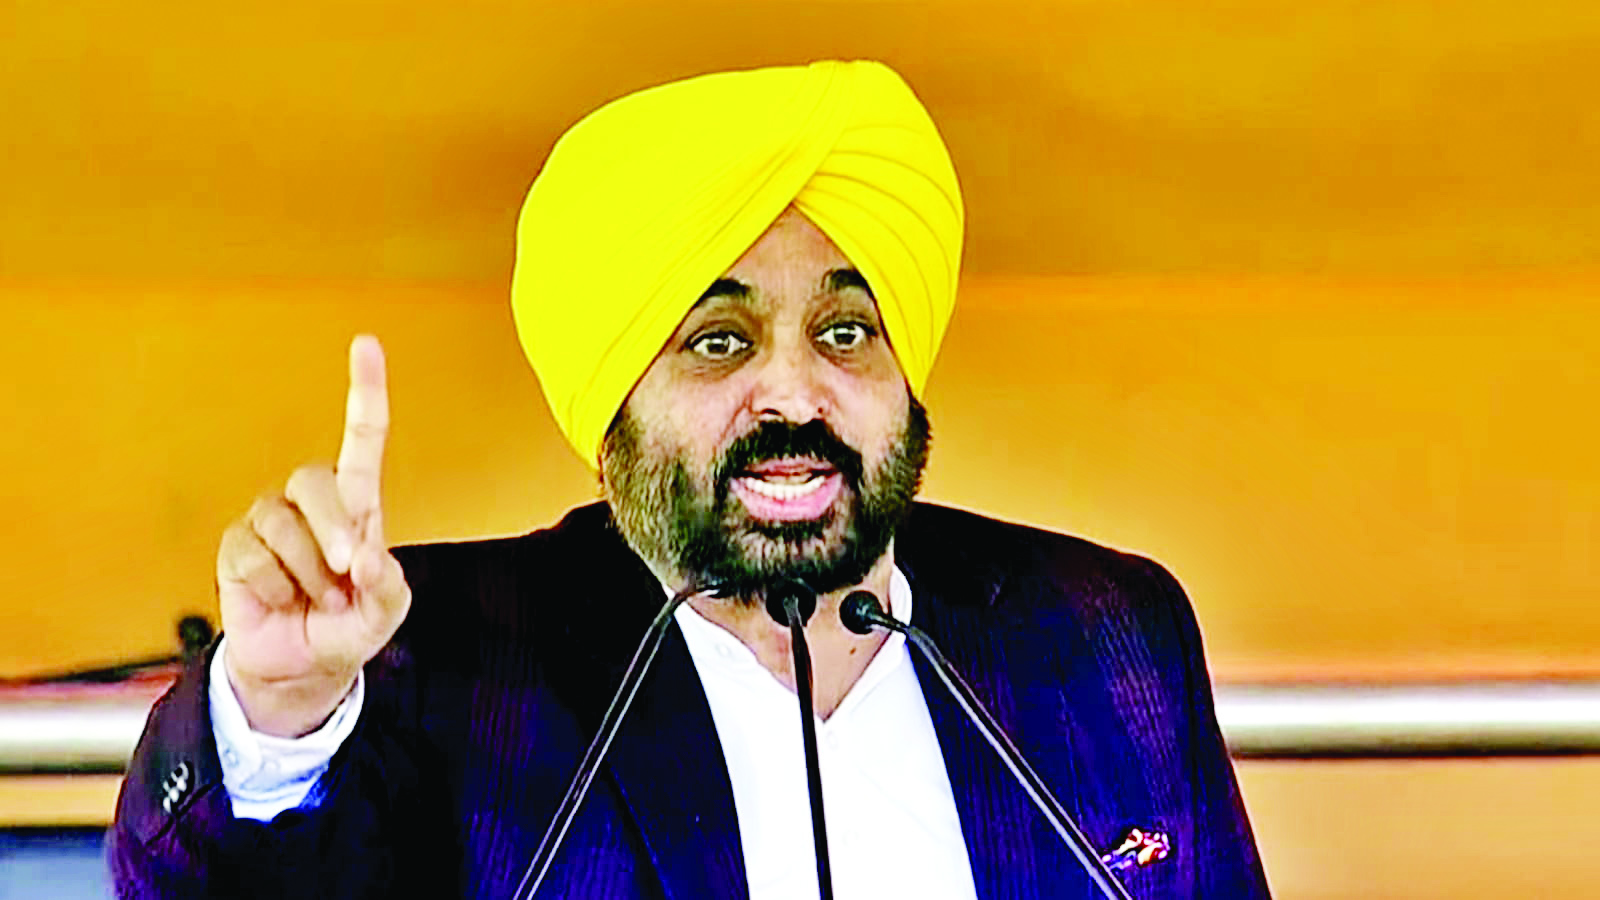 SC’s stance is clear, says Mann on detention of Kejriwal during elections